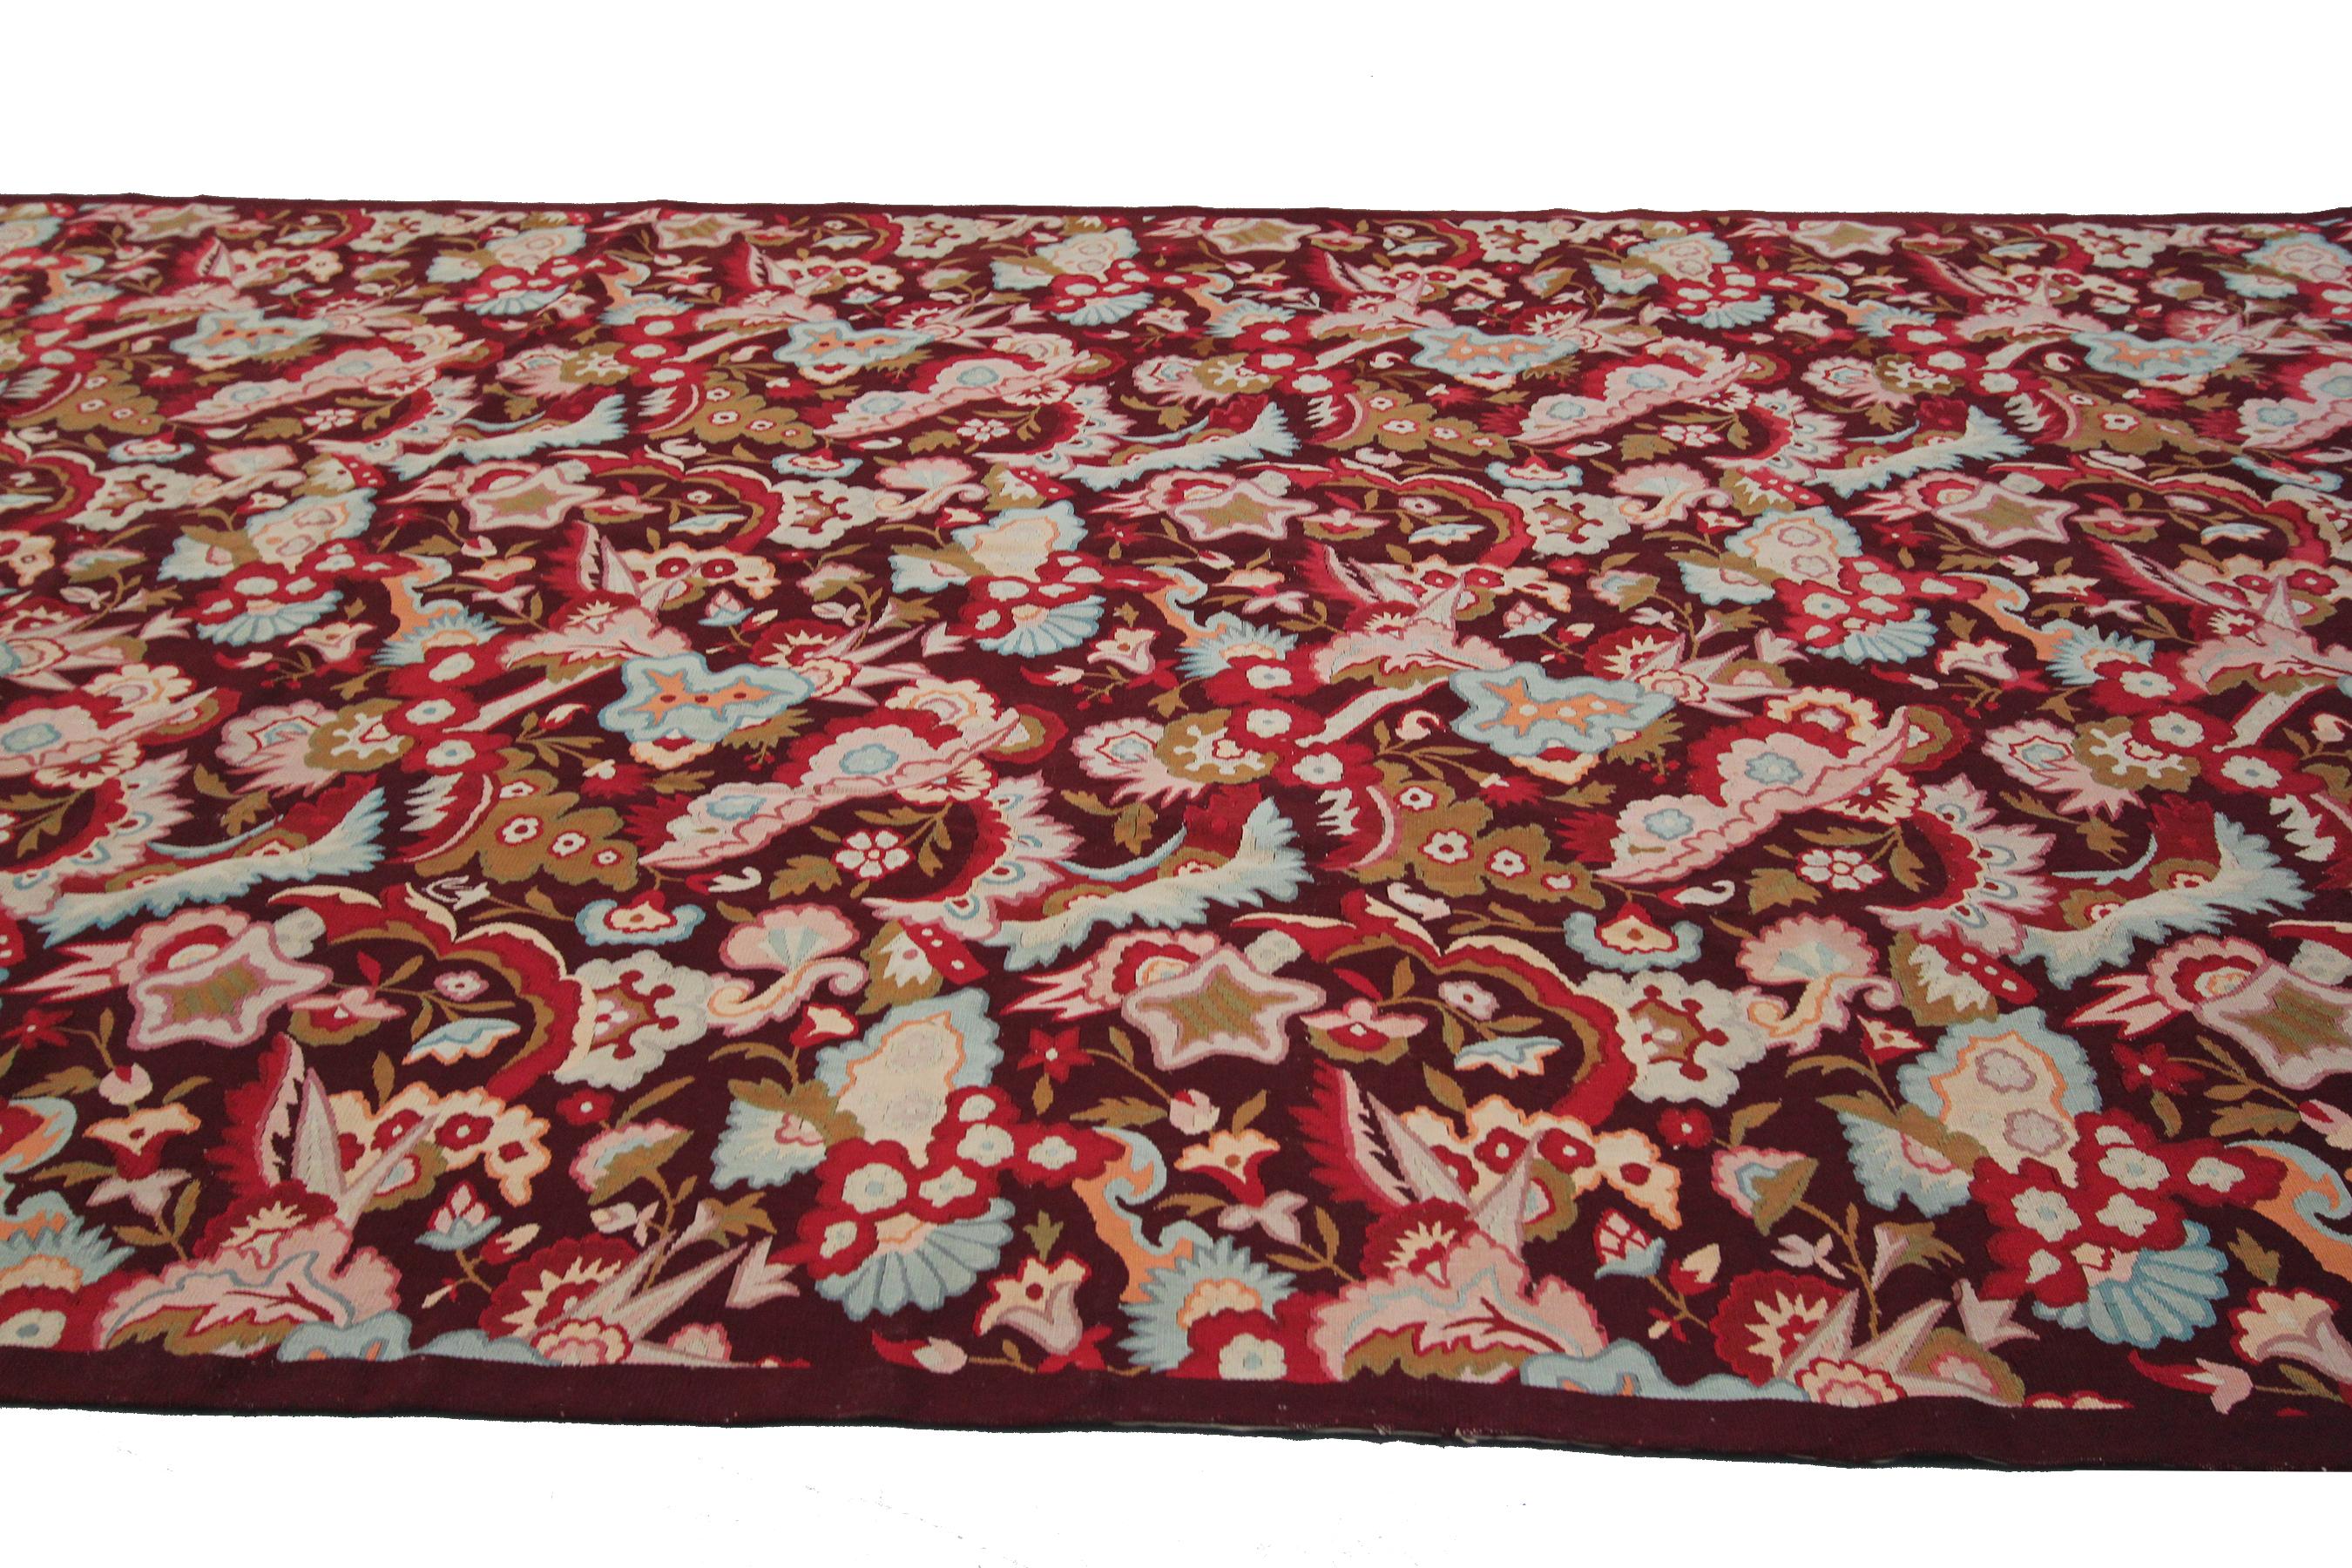 Late 19th Century Antique Empire Aubusson Rug 1890 Rare Authentic French Tapestry For Sale